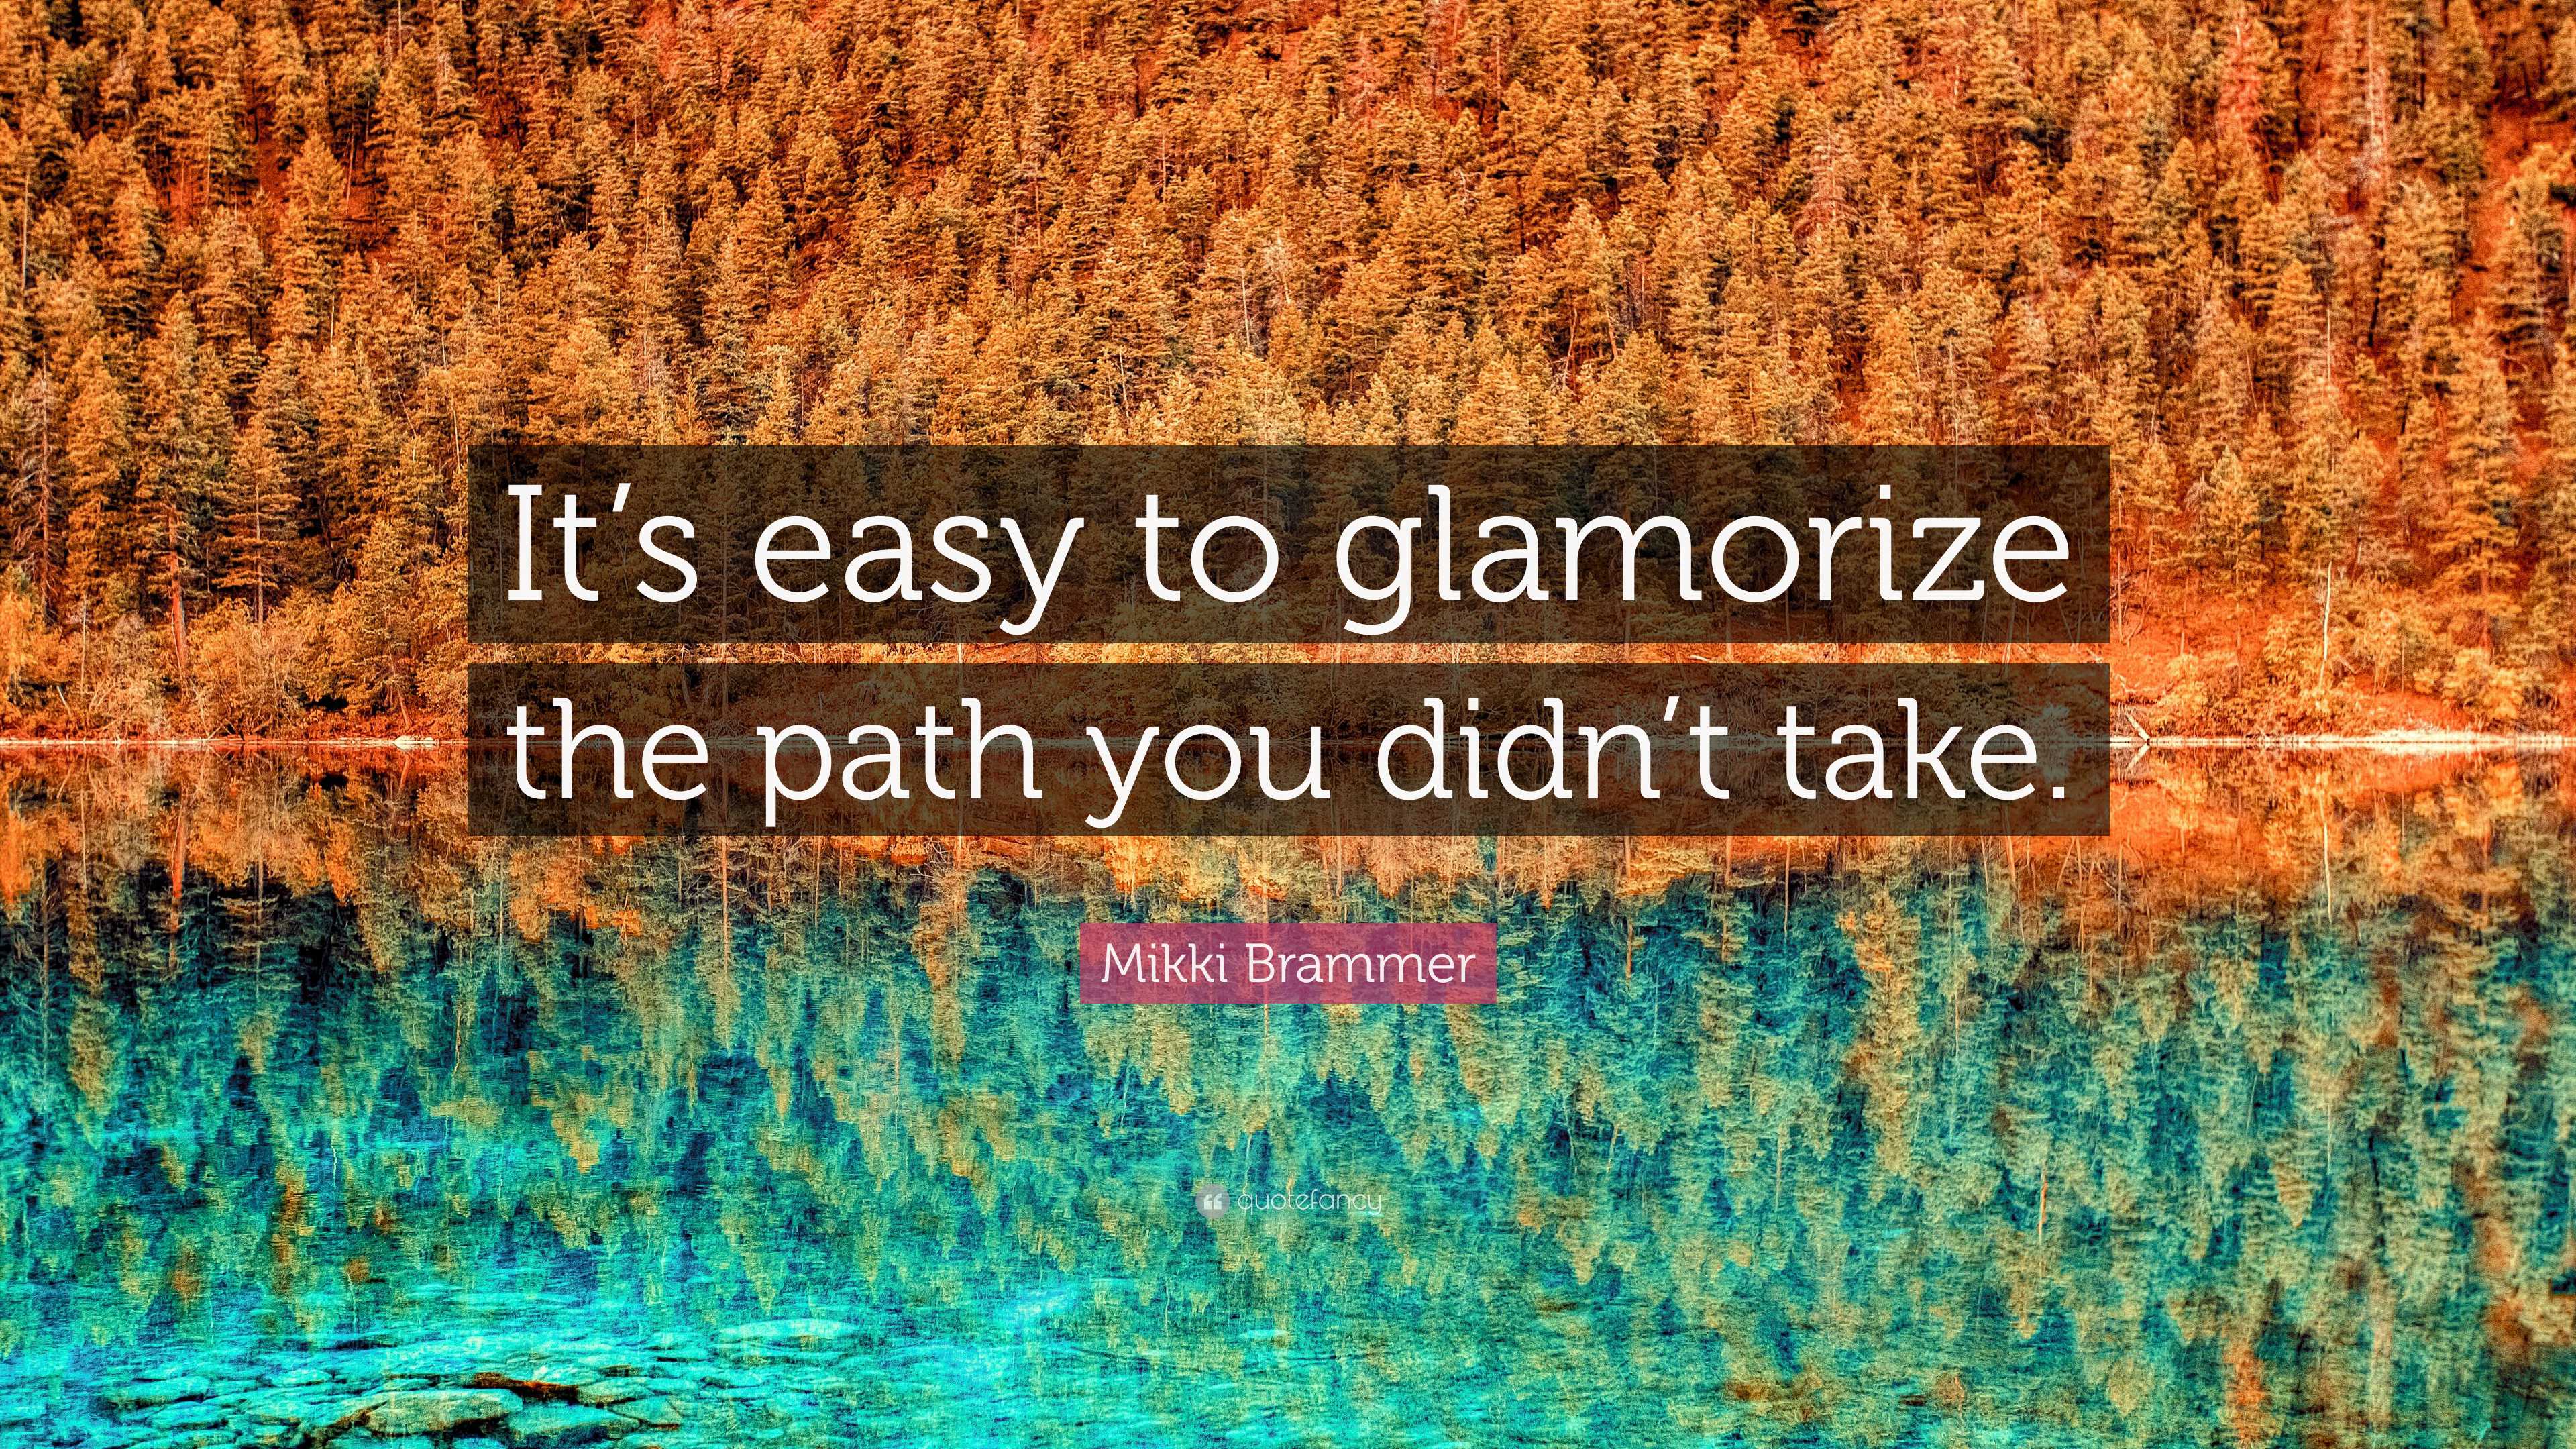 https://quotefancy.com/media/wallpaper/3840x2160/8049768-Mikki-Brammer-Quote-It-s-easy-to-glamorize-the-path-you-didn-t-take.jpg